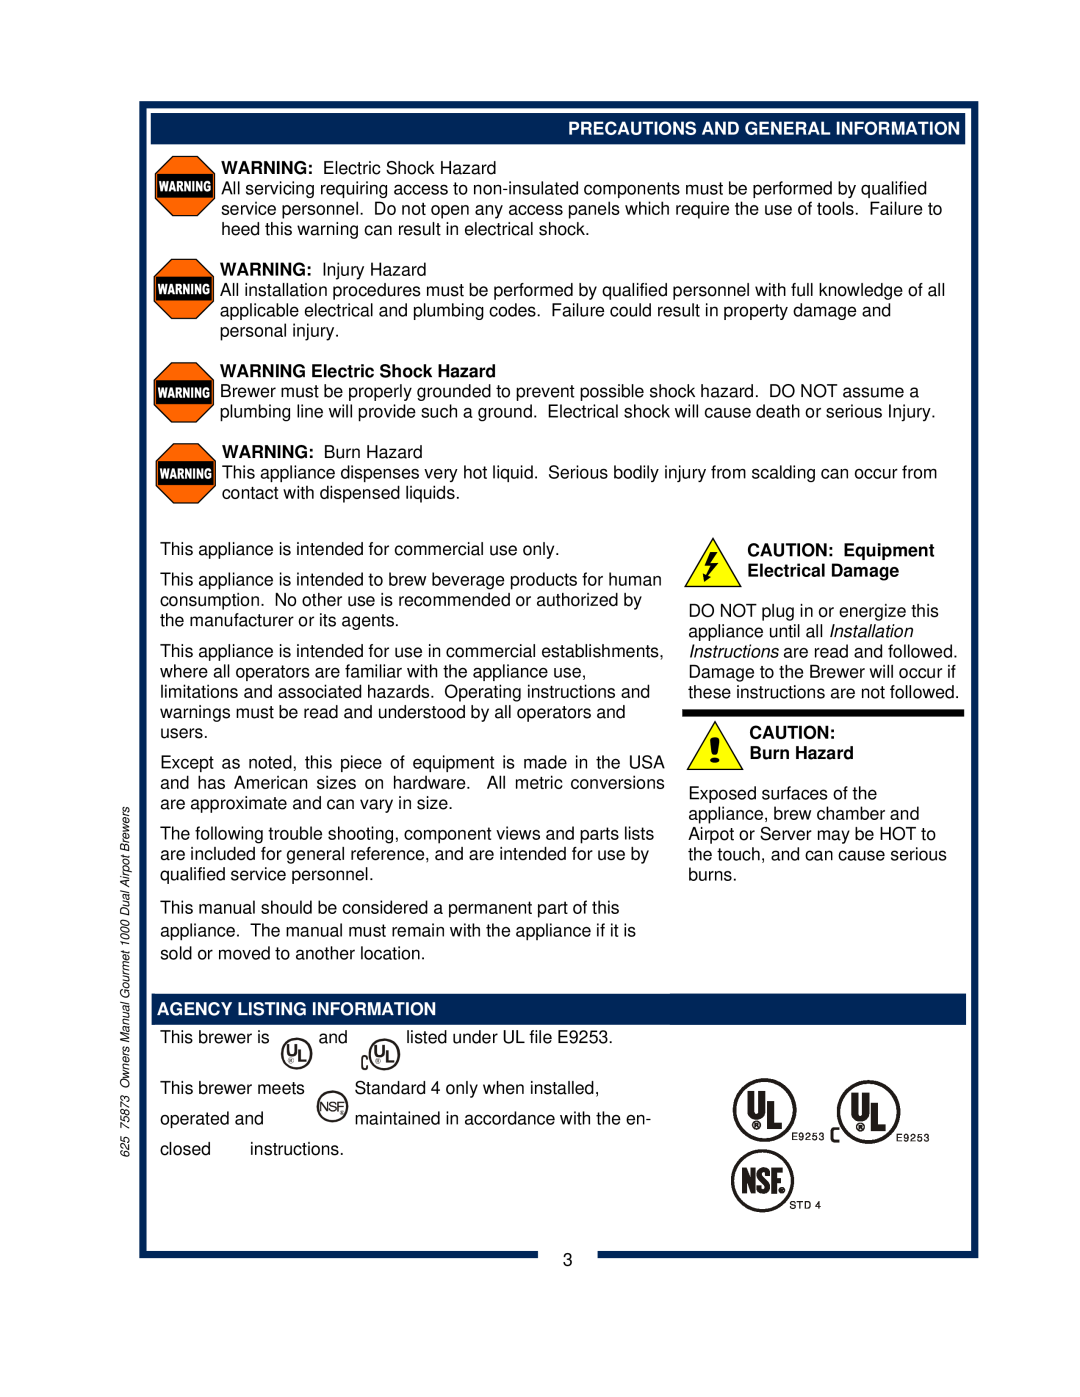 Bloomfield 8792 Precautions And General Information, WARNING Electric Shock Hazard, CAUTION Equipment Electrical Damage 